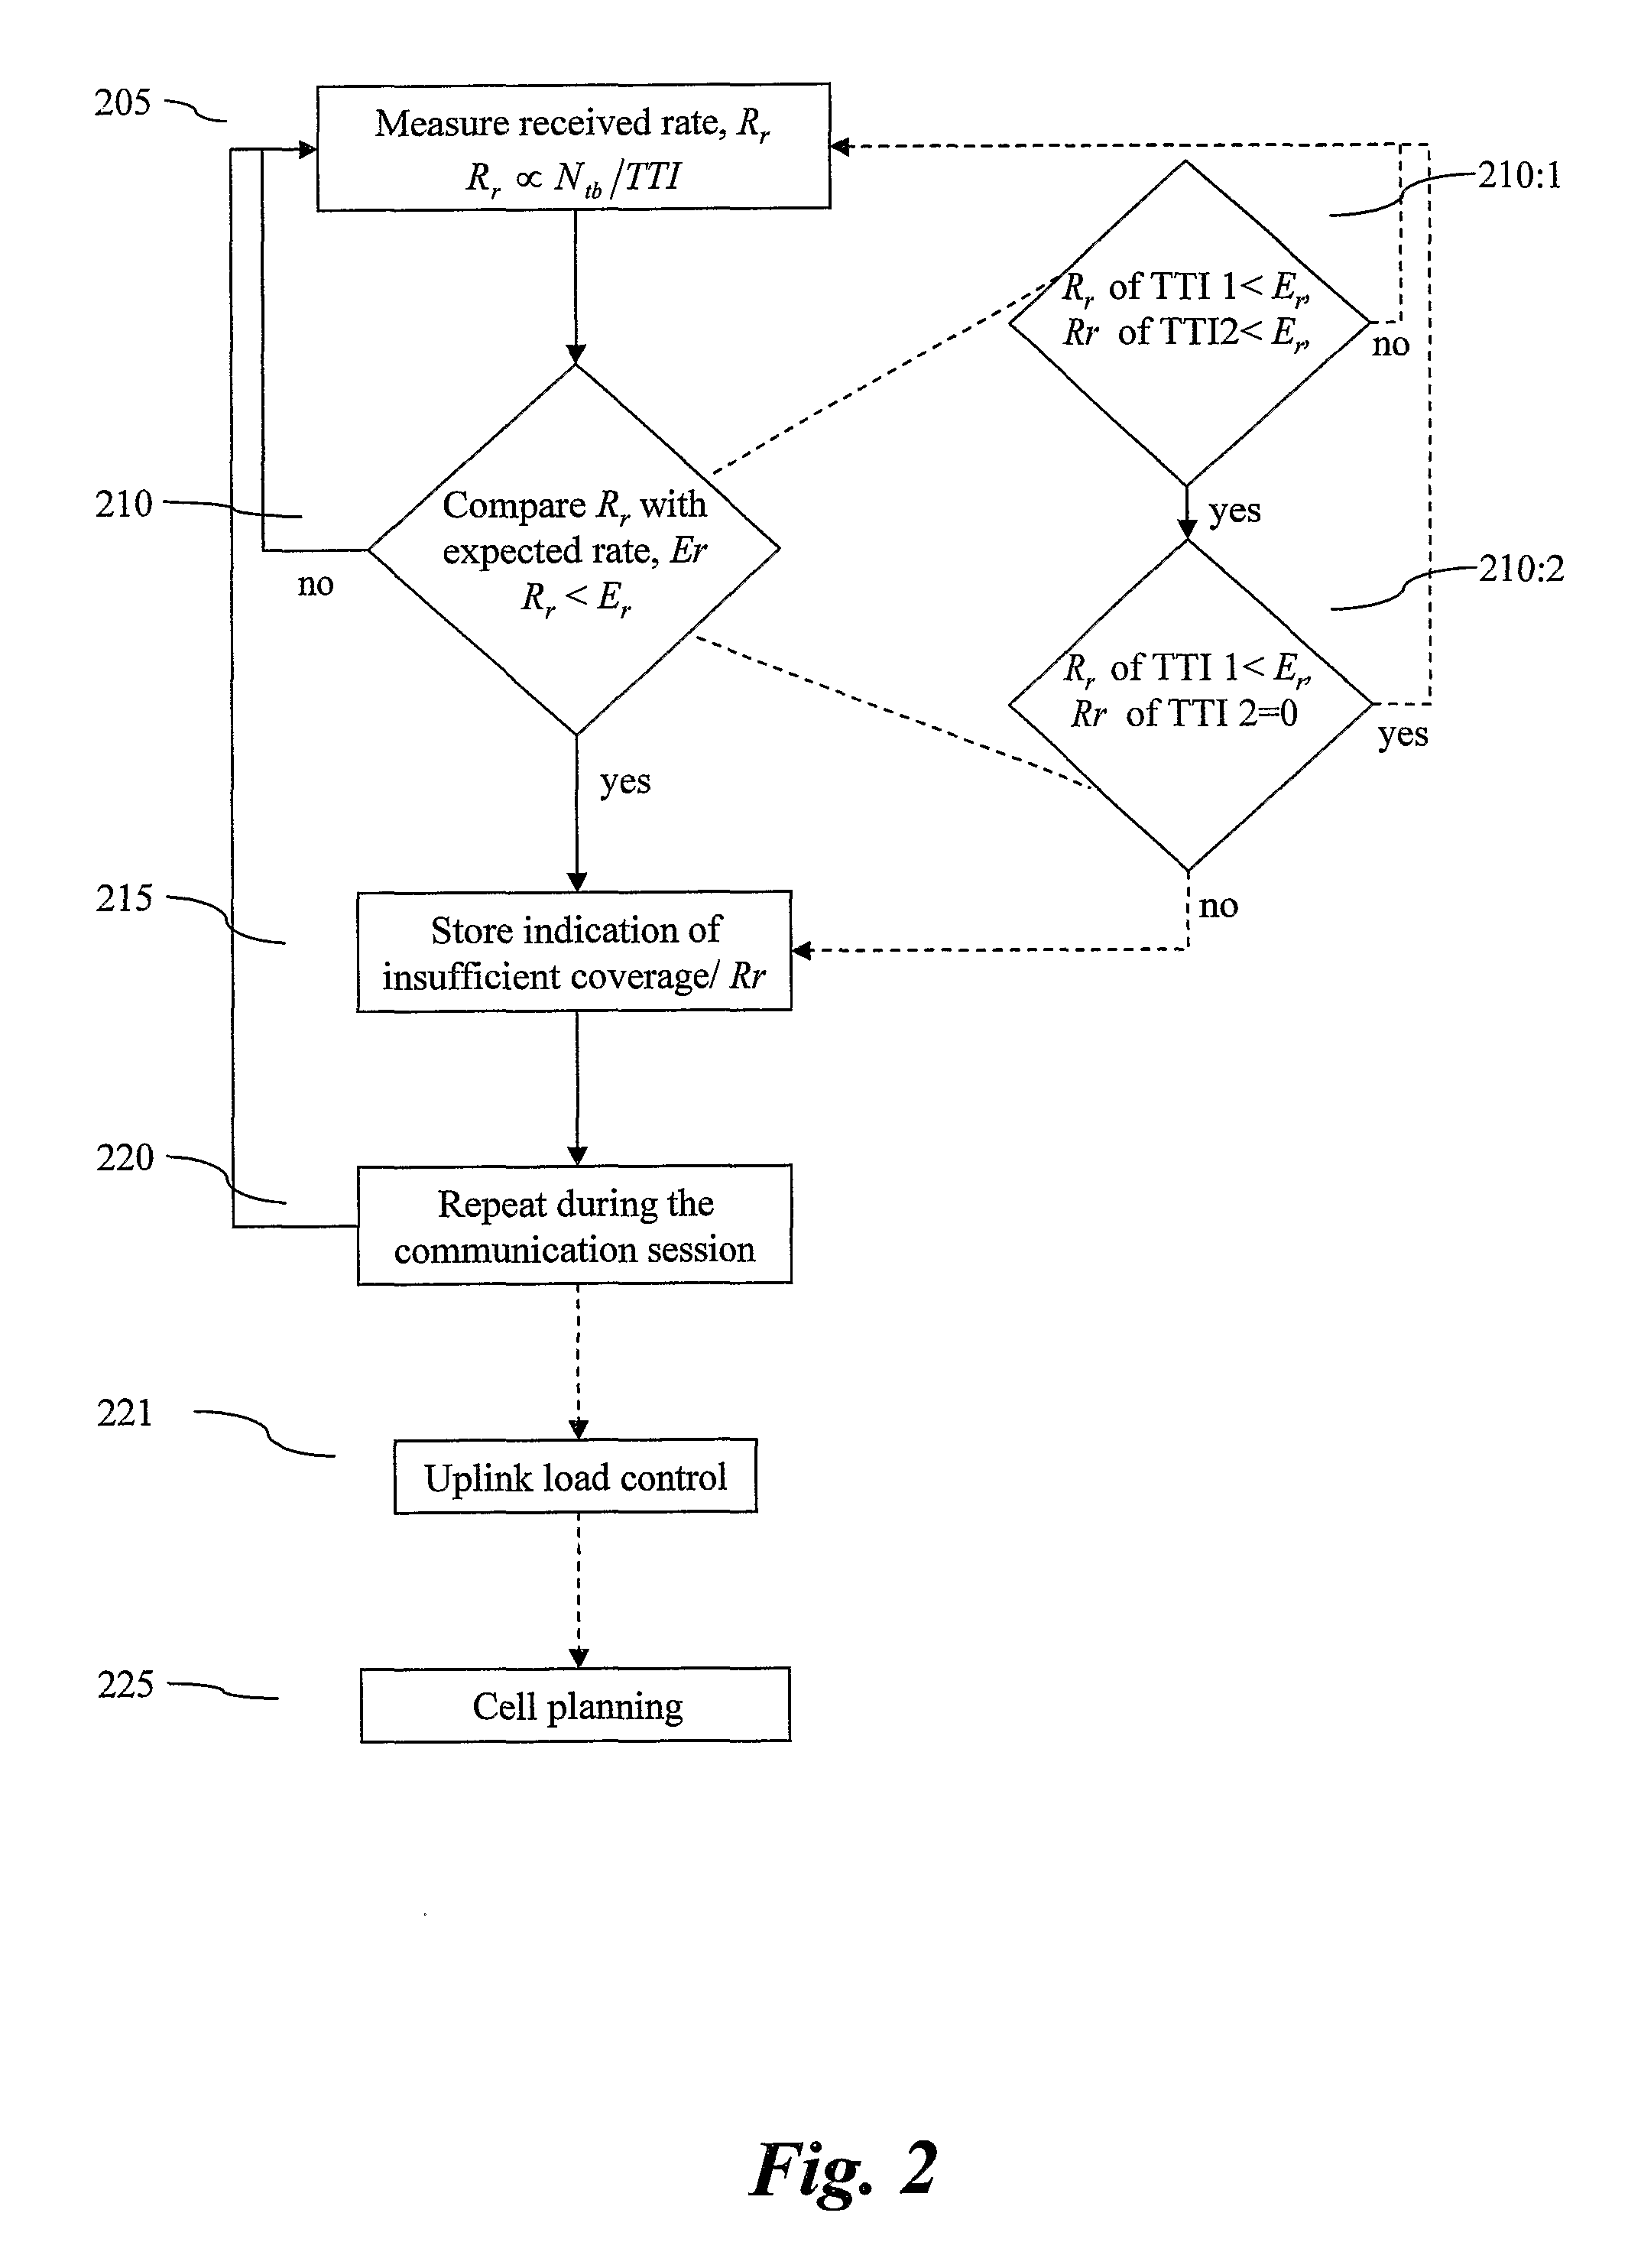 Methods and Arrangements for Estimating Uplink Coverage in Wireless Communication Networks with Dynamic Cell Coverage